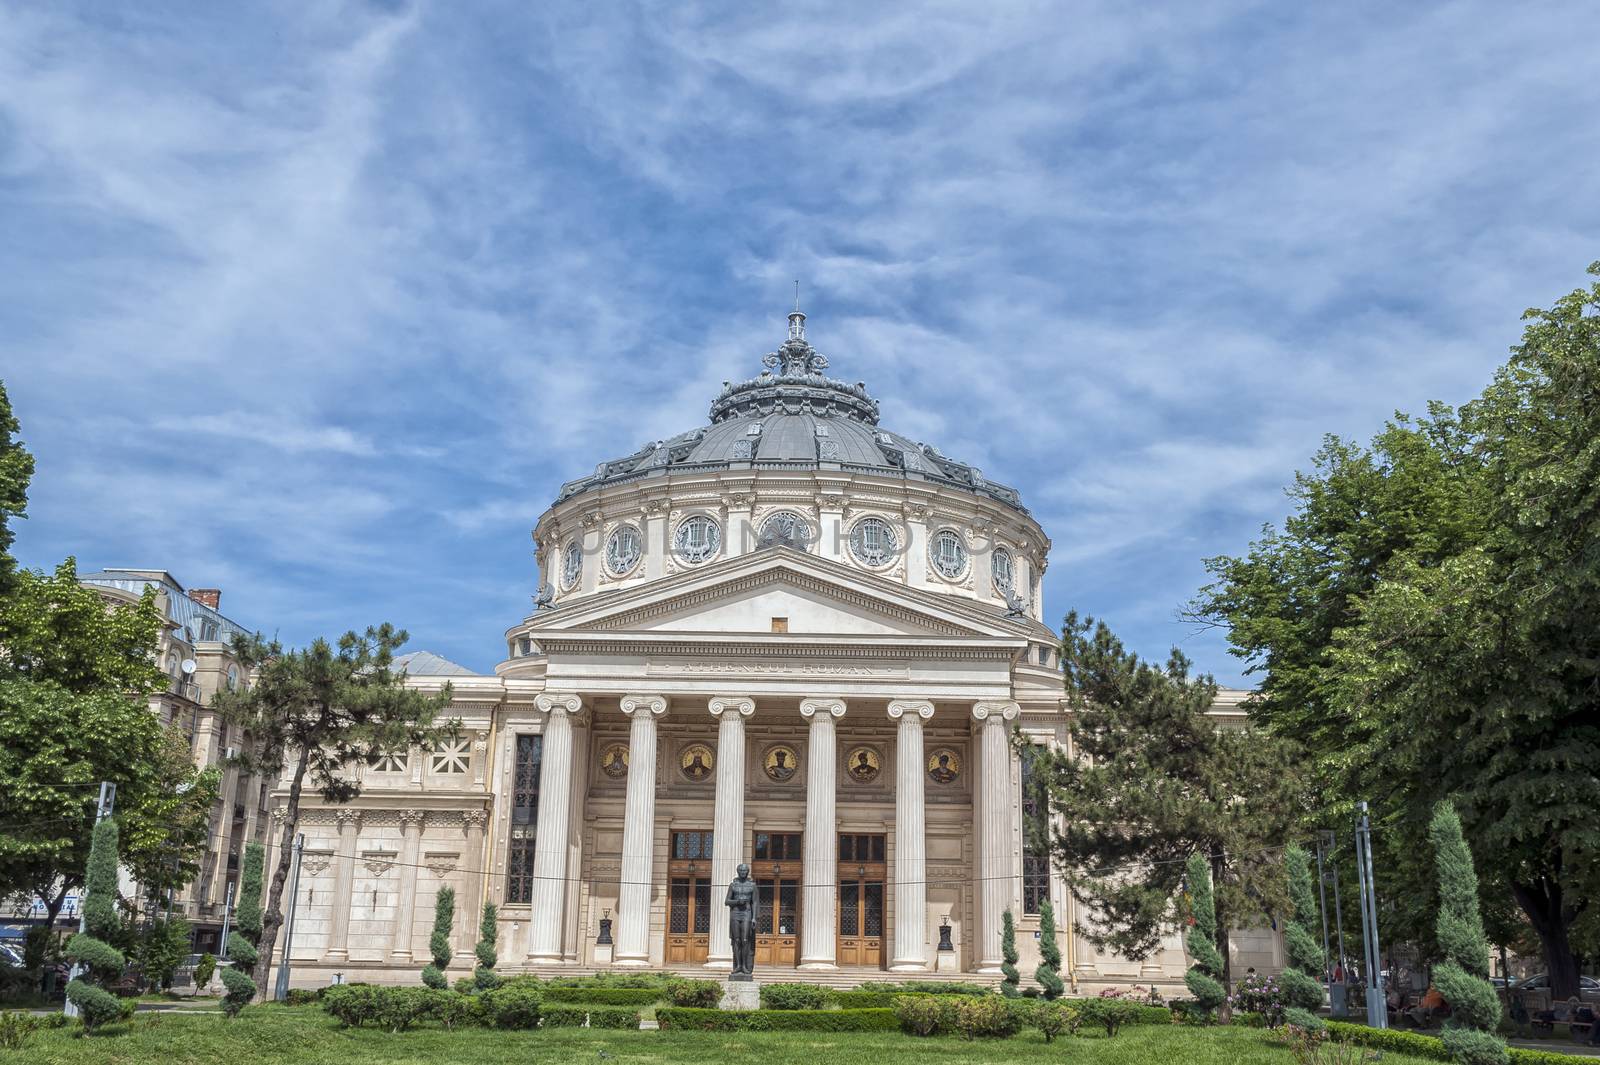 BUCHAREST, ROMANIA - MAY 09: The Romanian Athenaeum on May 09, 2013 in Bucharest, Romania. Opened in 1888 it is a concert hall in the center of Bucharest and a landmark of the Romanian capital city. by maxmitzu